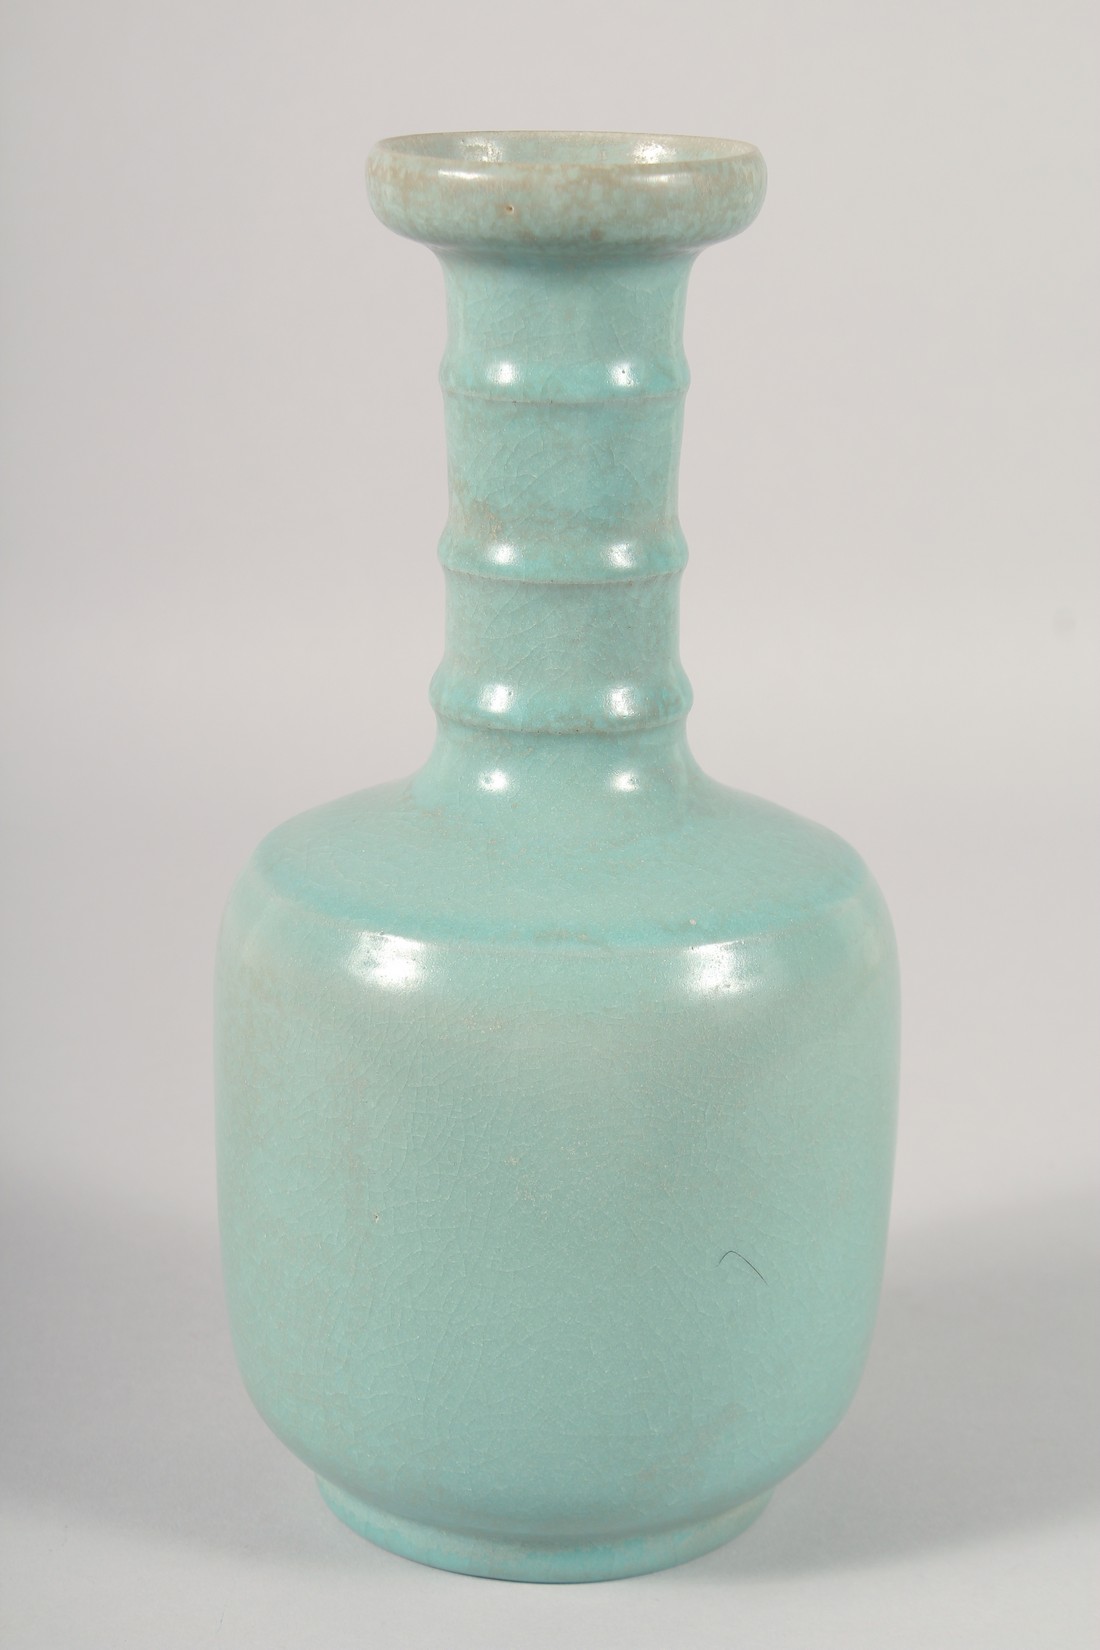 A CHINESE CELADON GLAZE VASE, with ribbed neck, 25.5cm high. - Image 2 of 5